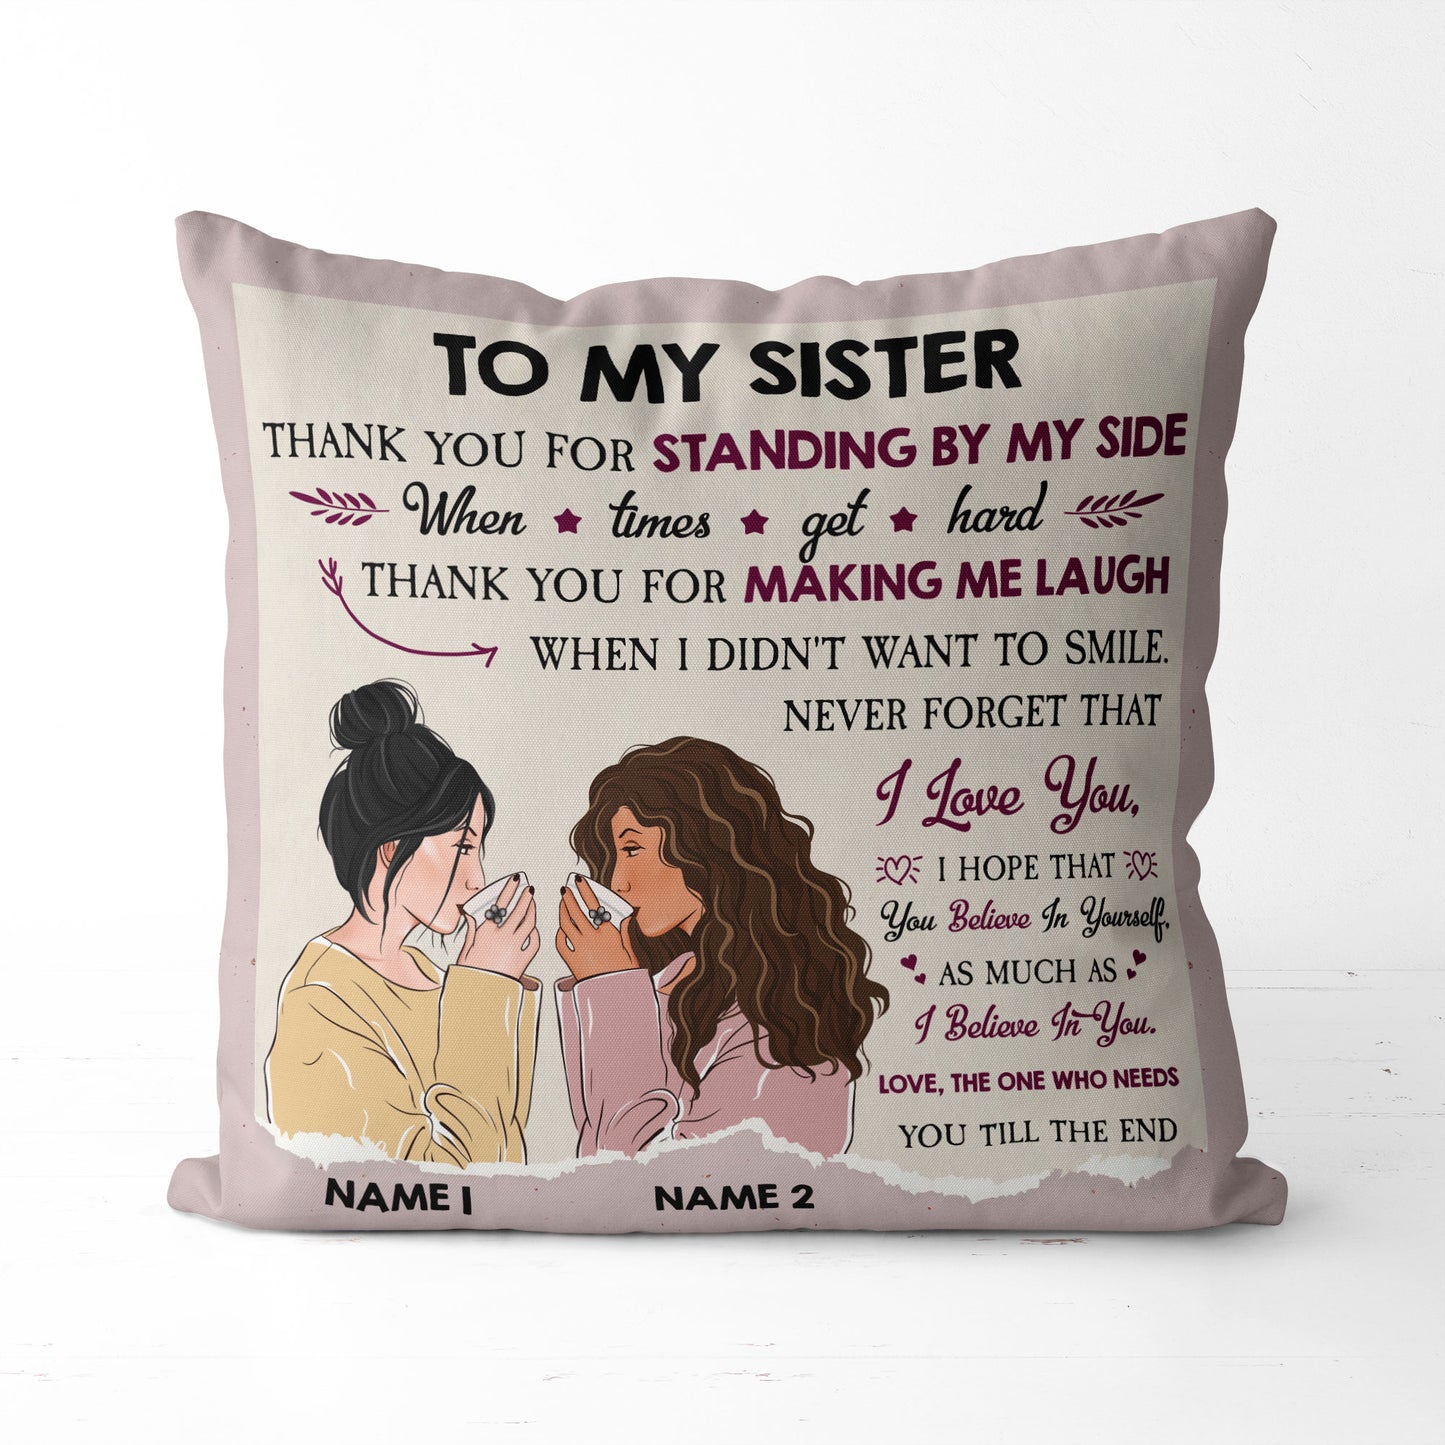 Sisters - Never Forget That I Love You, Sisters Custom Pillow, Gift For Sisters, Best Friends, Sibling Pillow, Family-Macorner